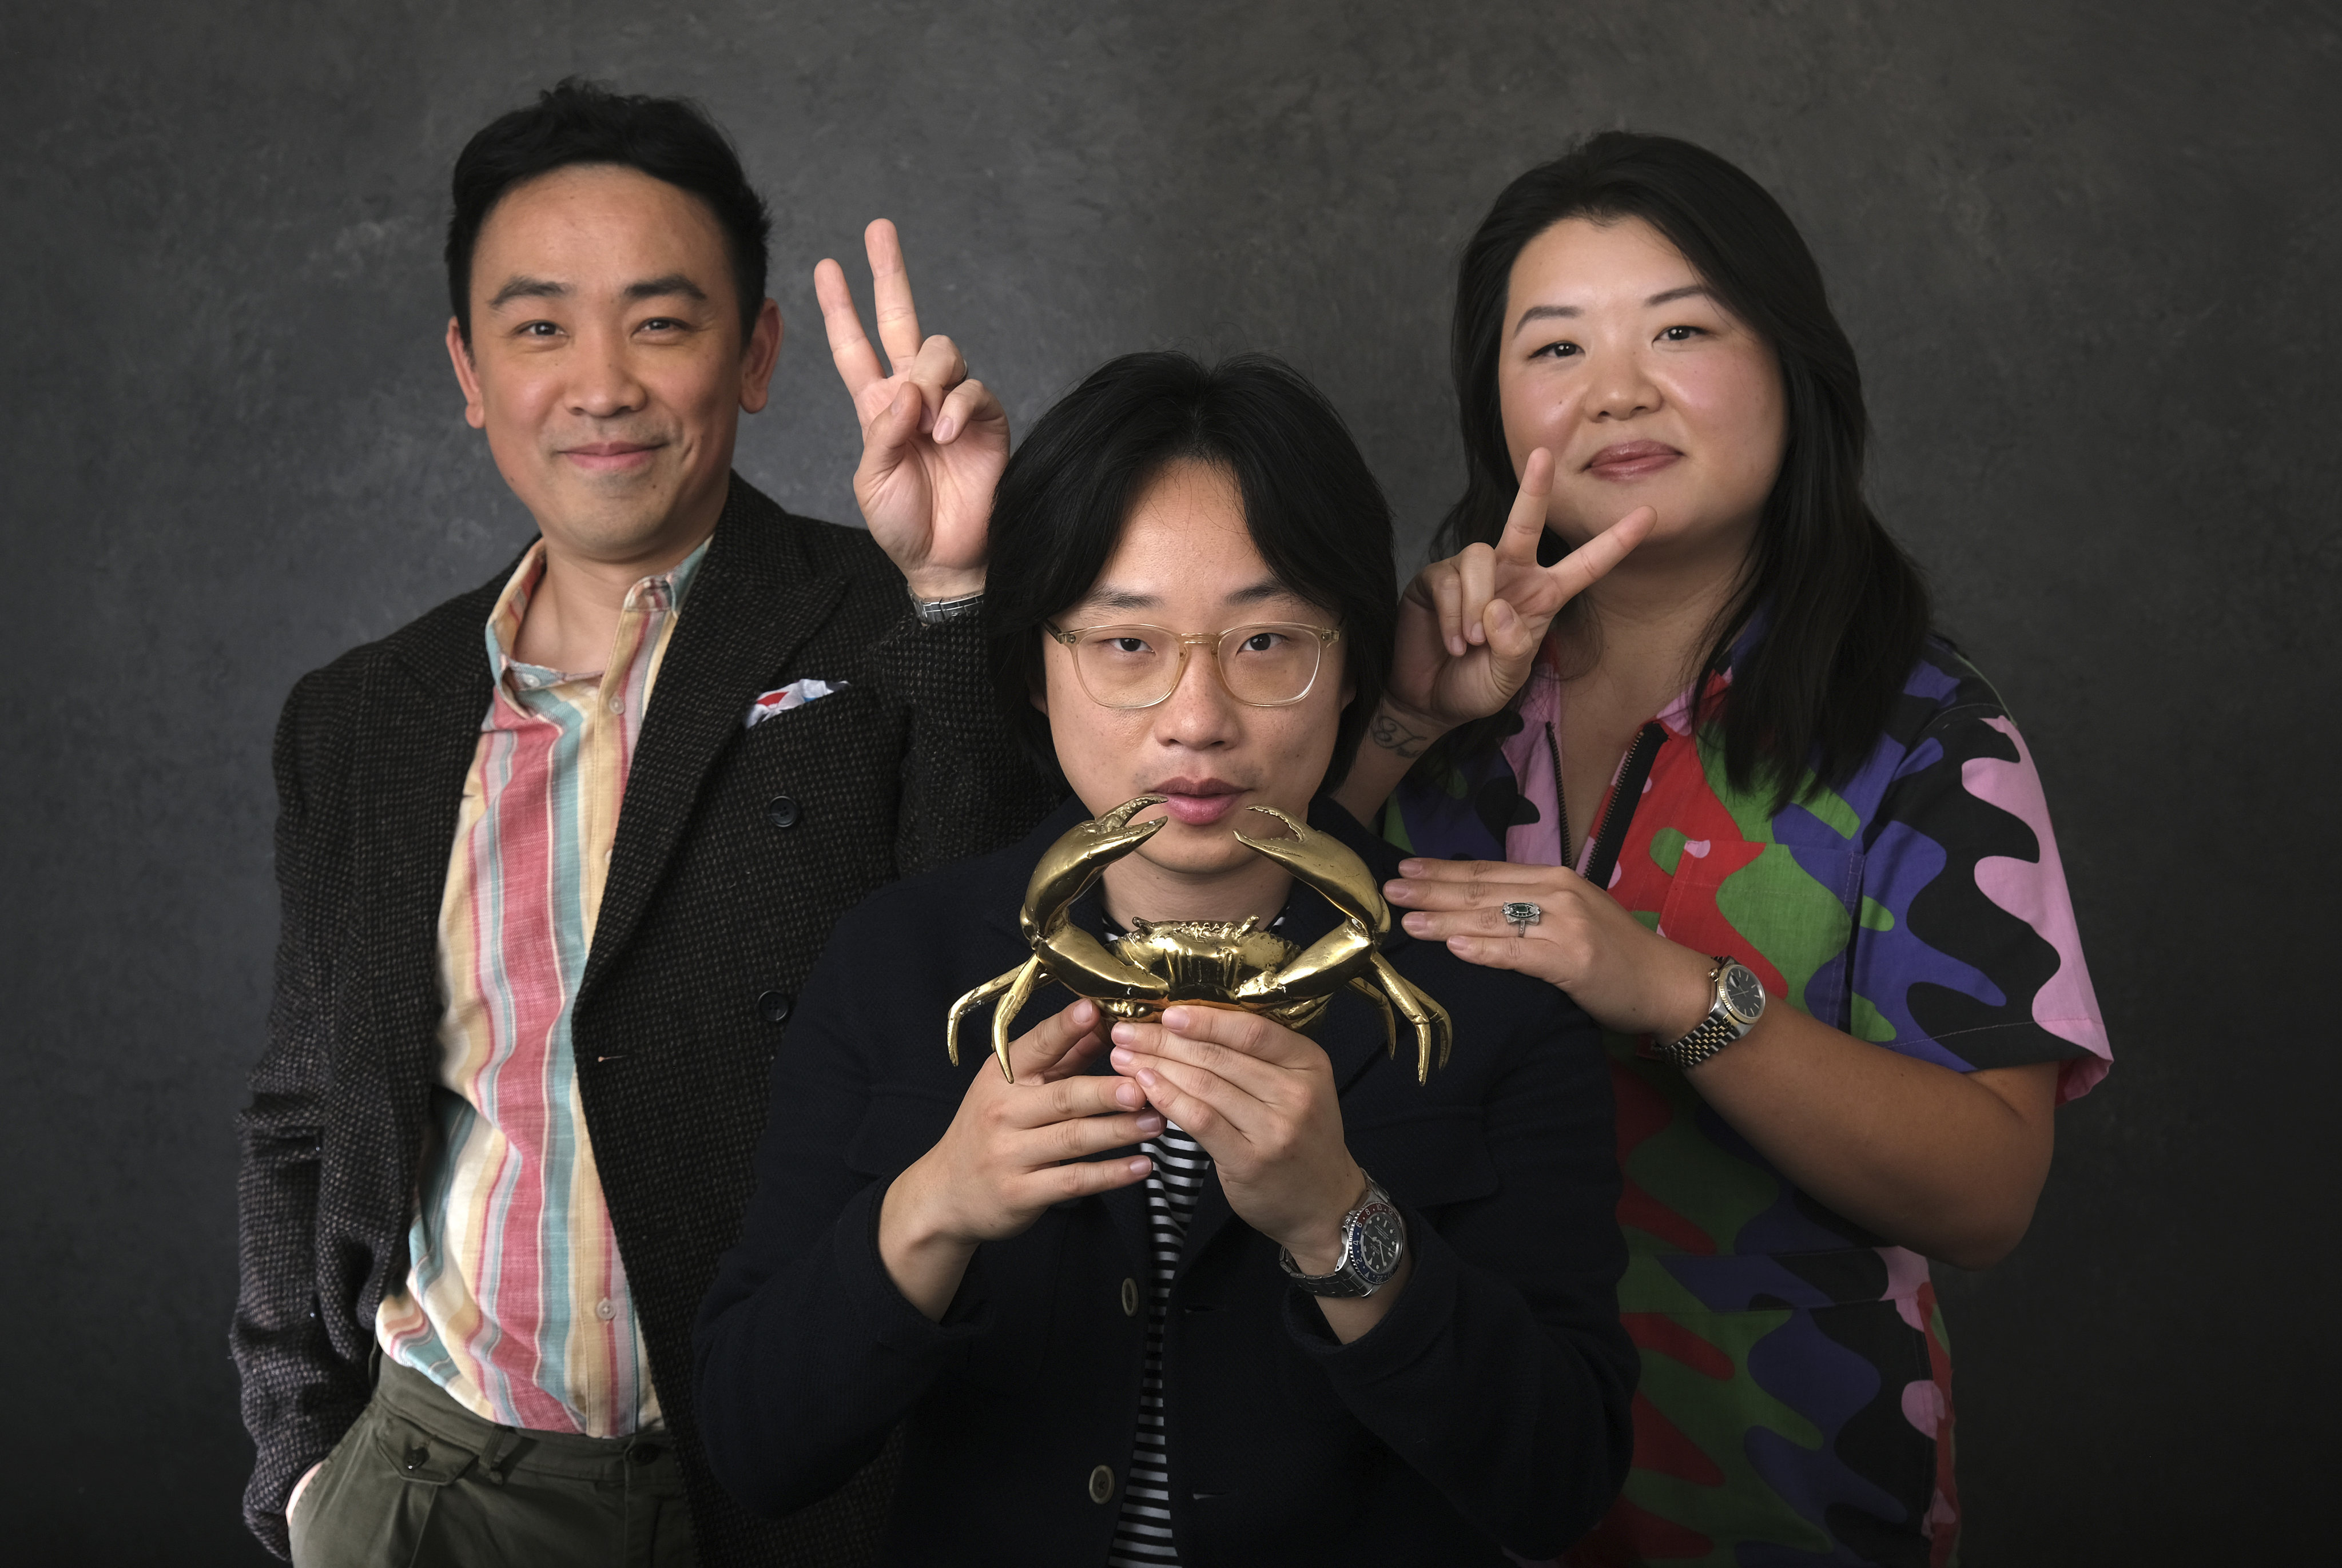 Crab Club, run by Crazy Rich Asians actor Jimmy O. Yang (centre), Ken Cheng (left) and Jessica Gao, is a Hollywood production company focused on Asian-American stories that started as a supper club for friends. Photo: AP